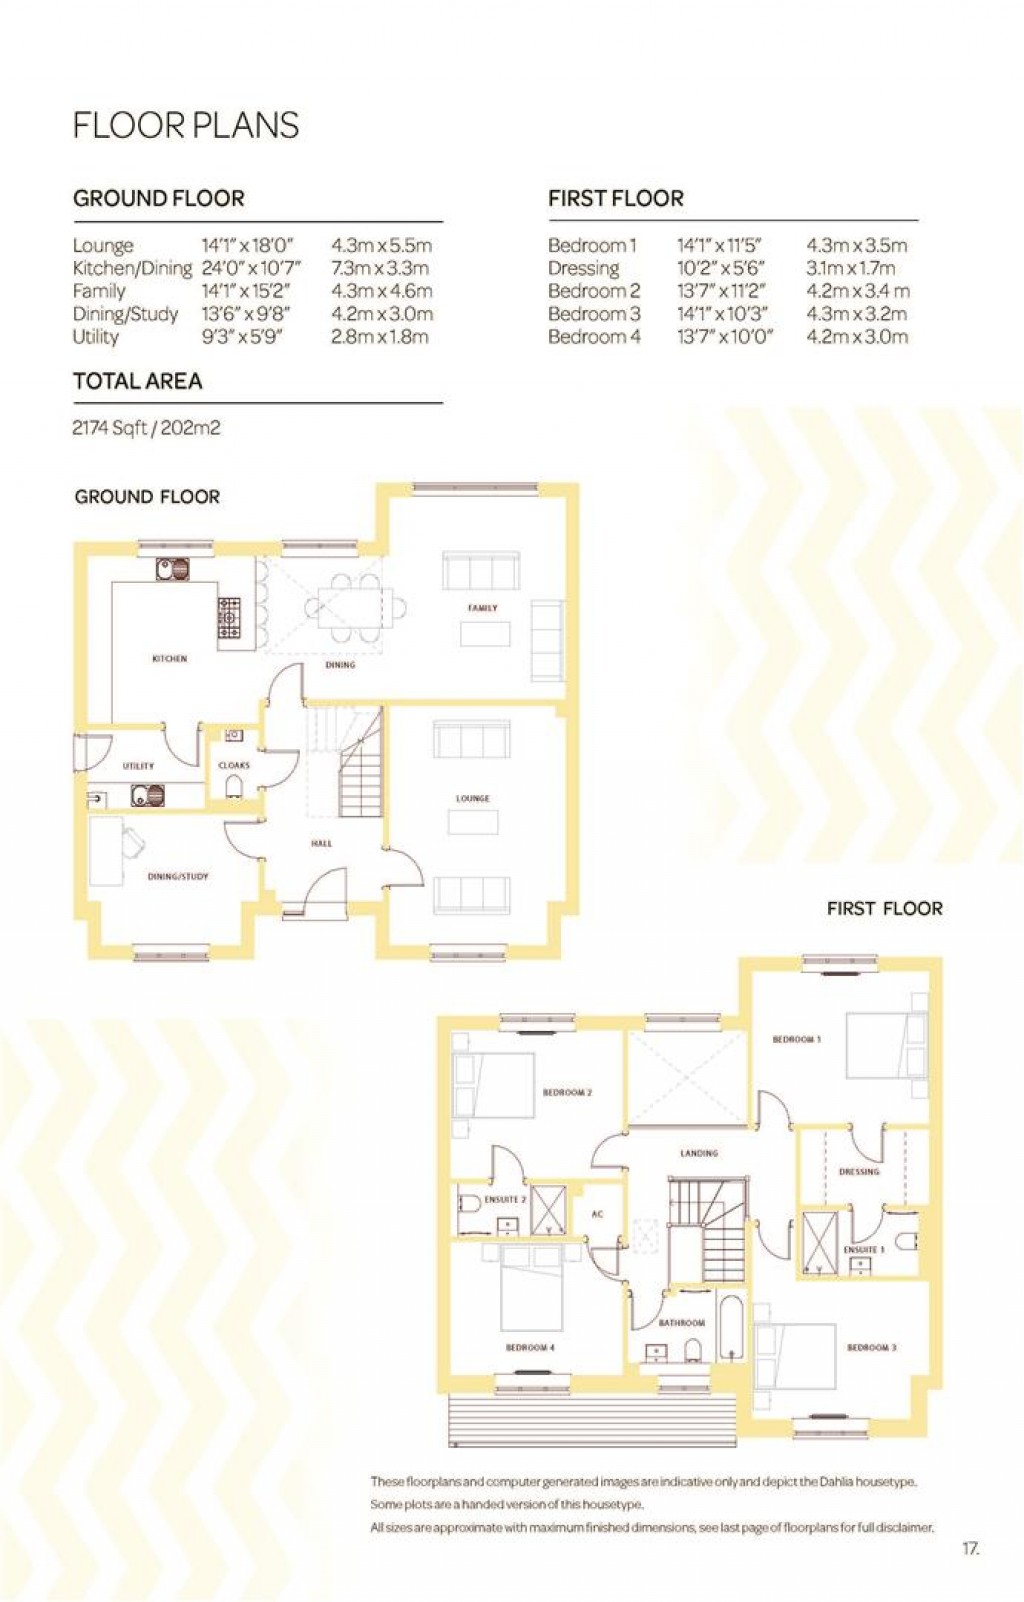 Floorplans For The Glebe, Lavendon - Viewing Essential!